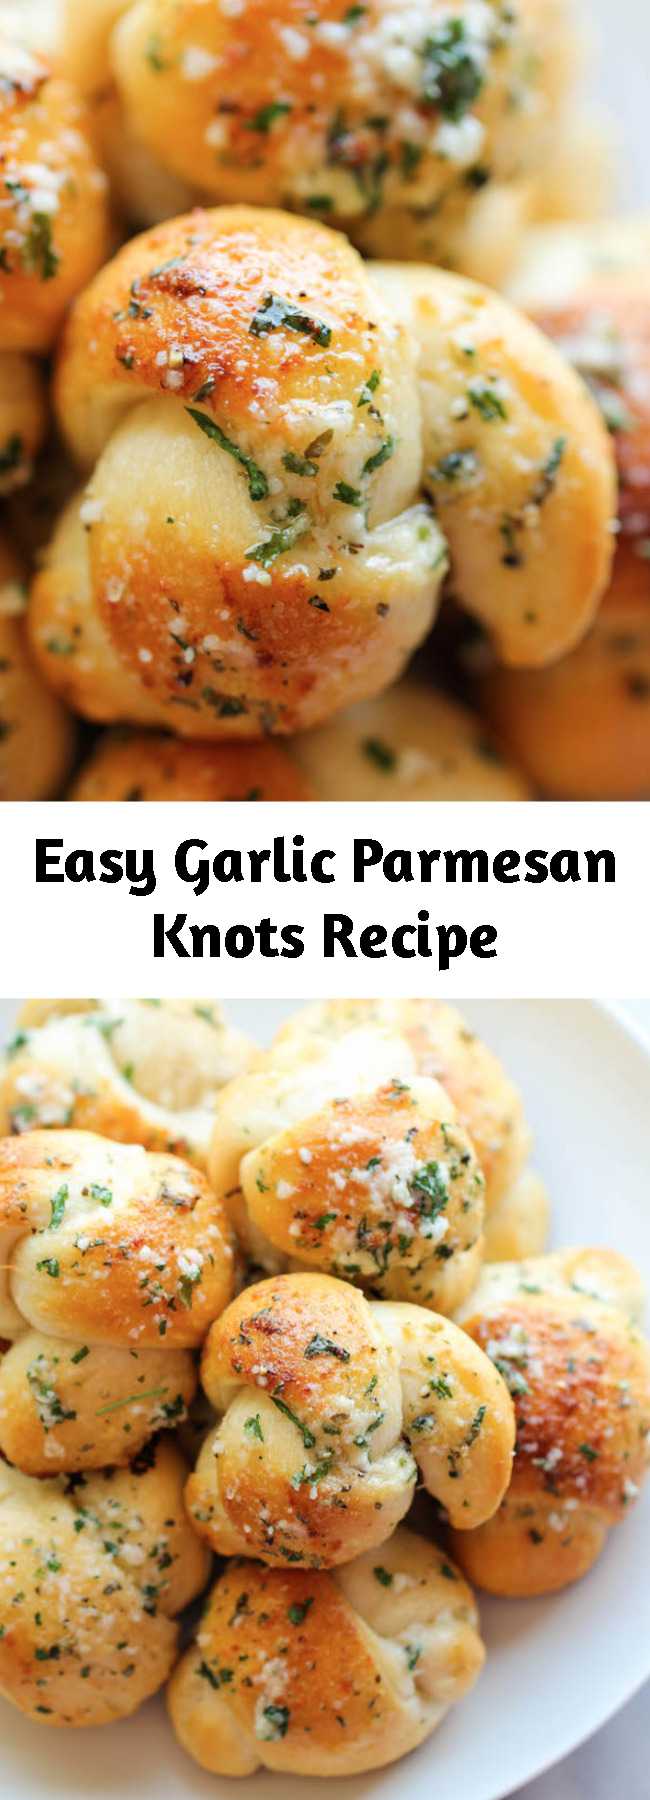 Easy Garlic Parmesan Knots Recipe - Fool-proof, buttery garlic knots that come together in less than 20 min – it doesn’t get easier than that!